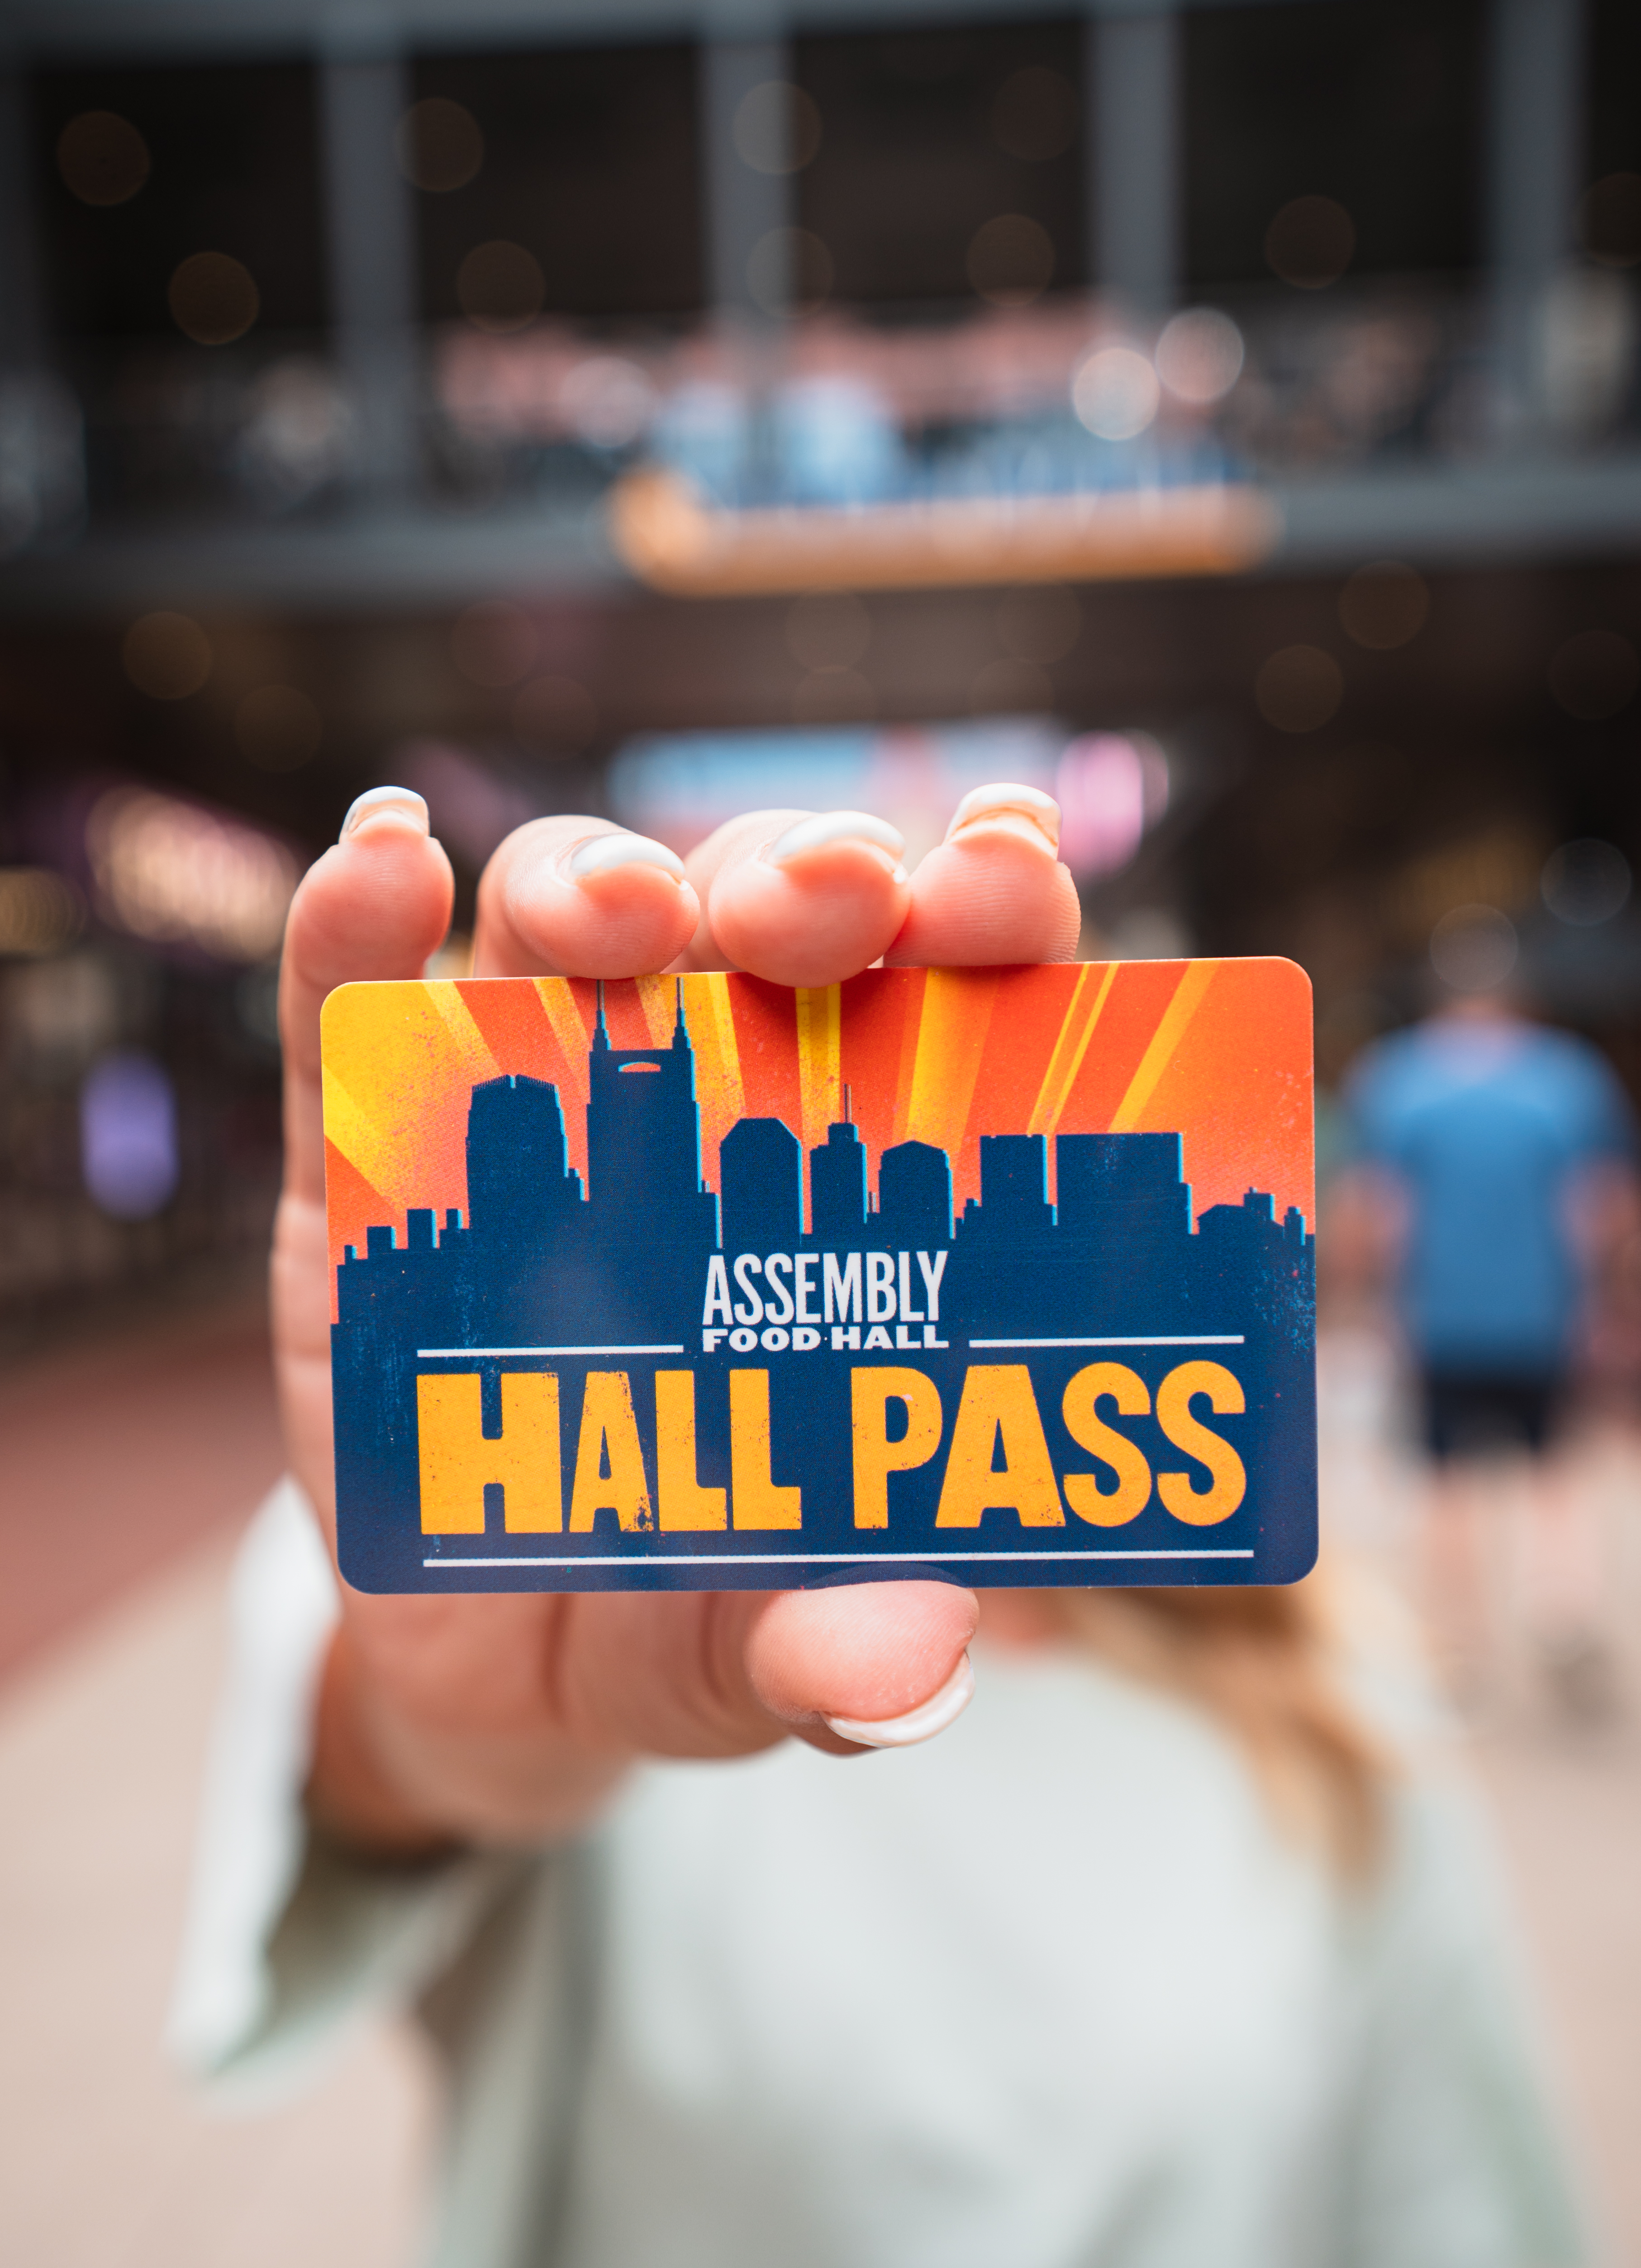 Photograph of the Hall Pass card.